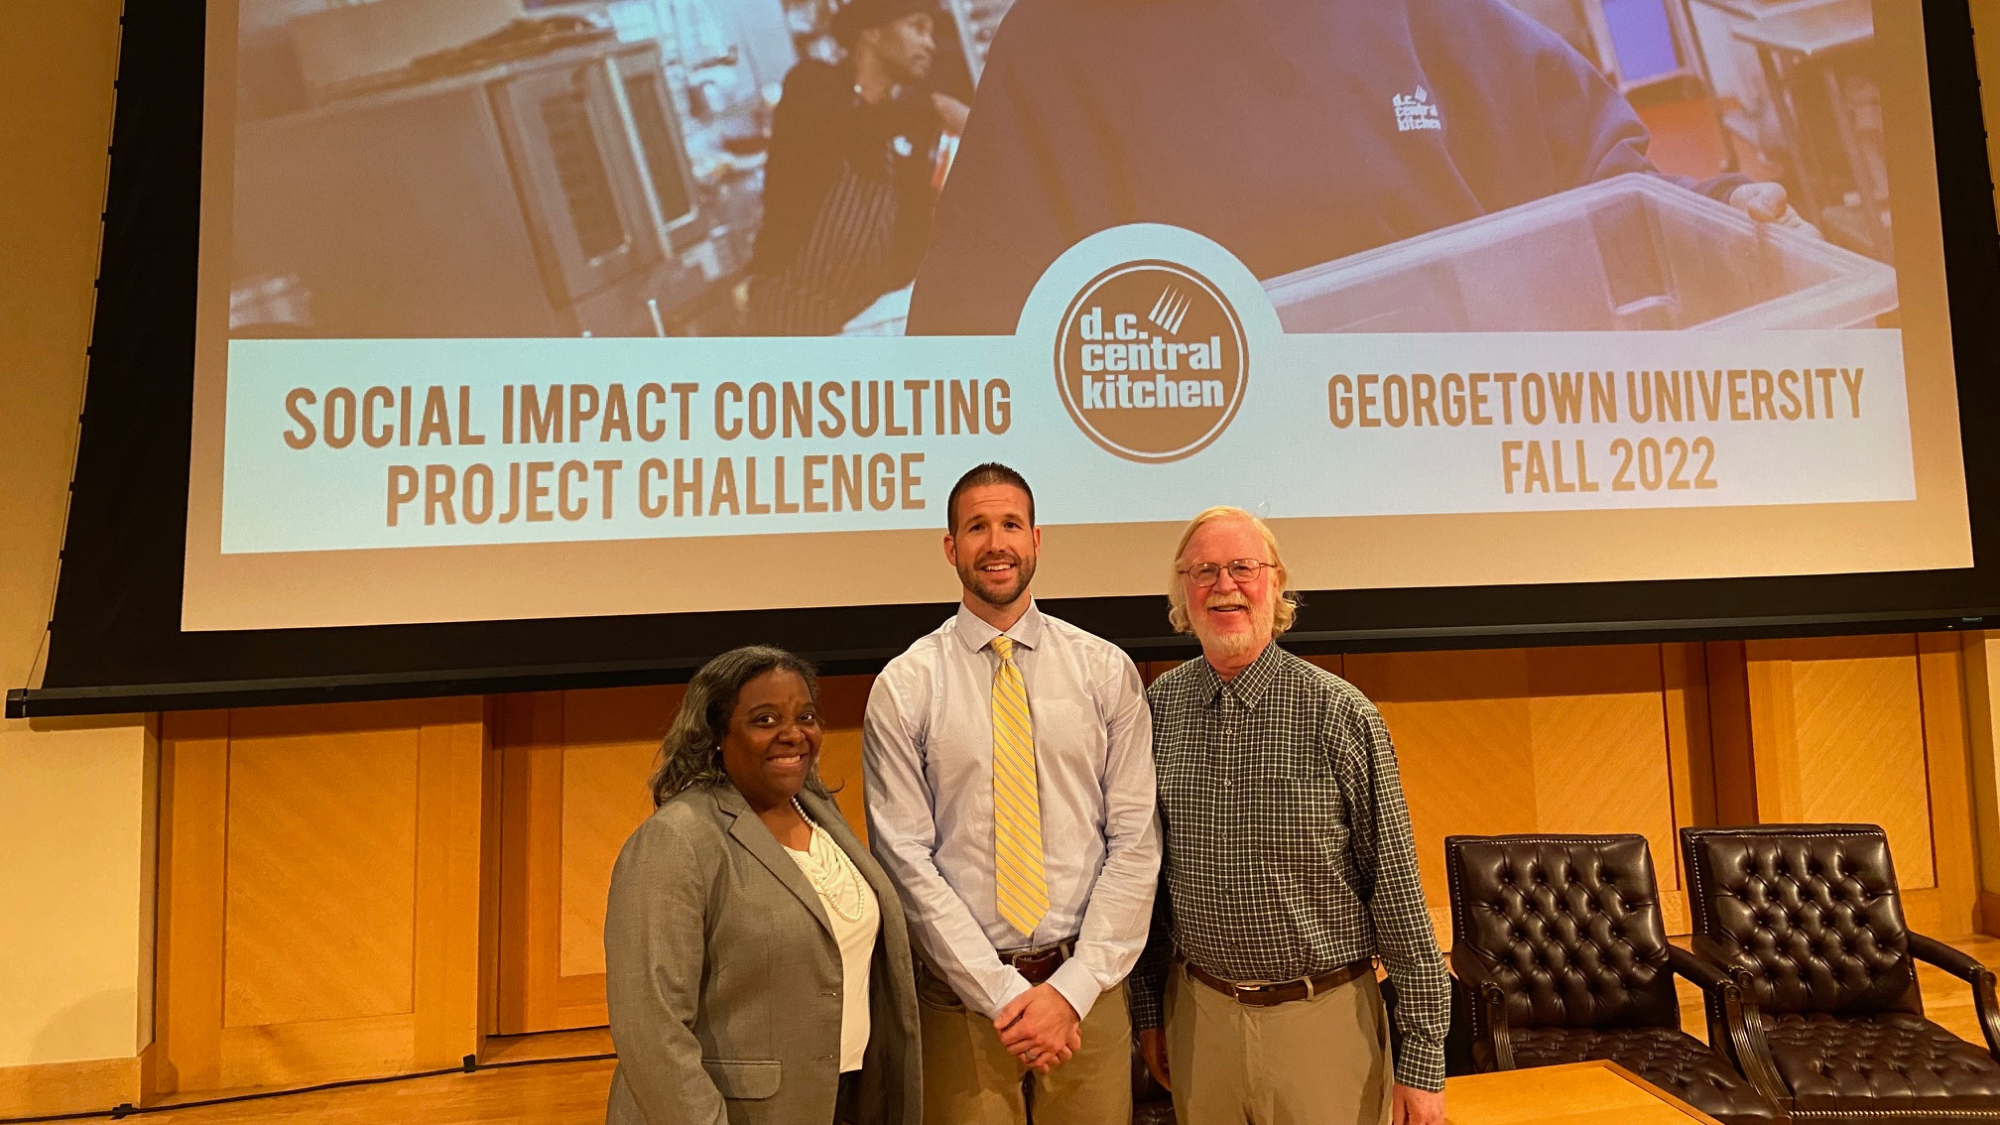 DC Central Kitchen Presents Social Impact Consulting Project to First-Year Students